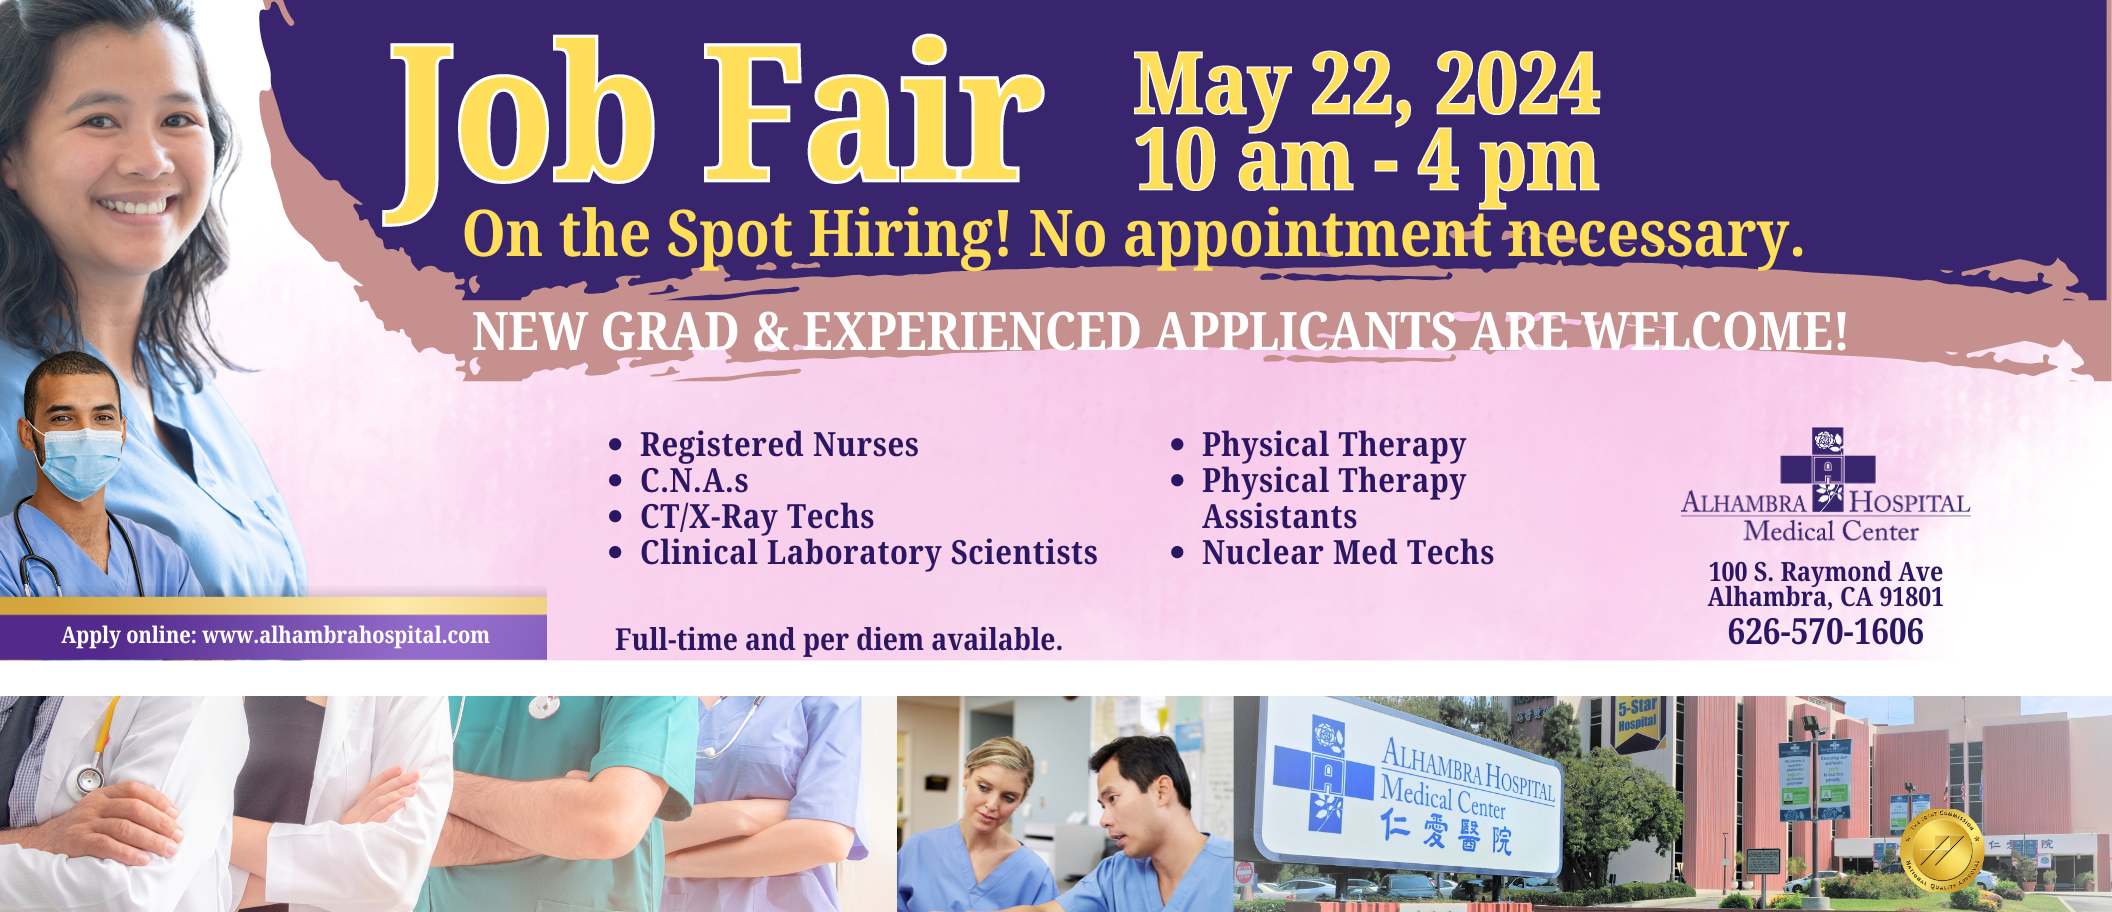 Banner of a job fair to hire for rn, cna, physical therapist and other jobs